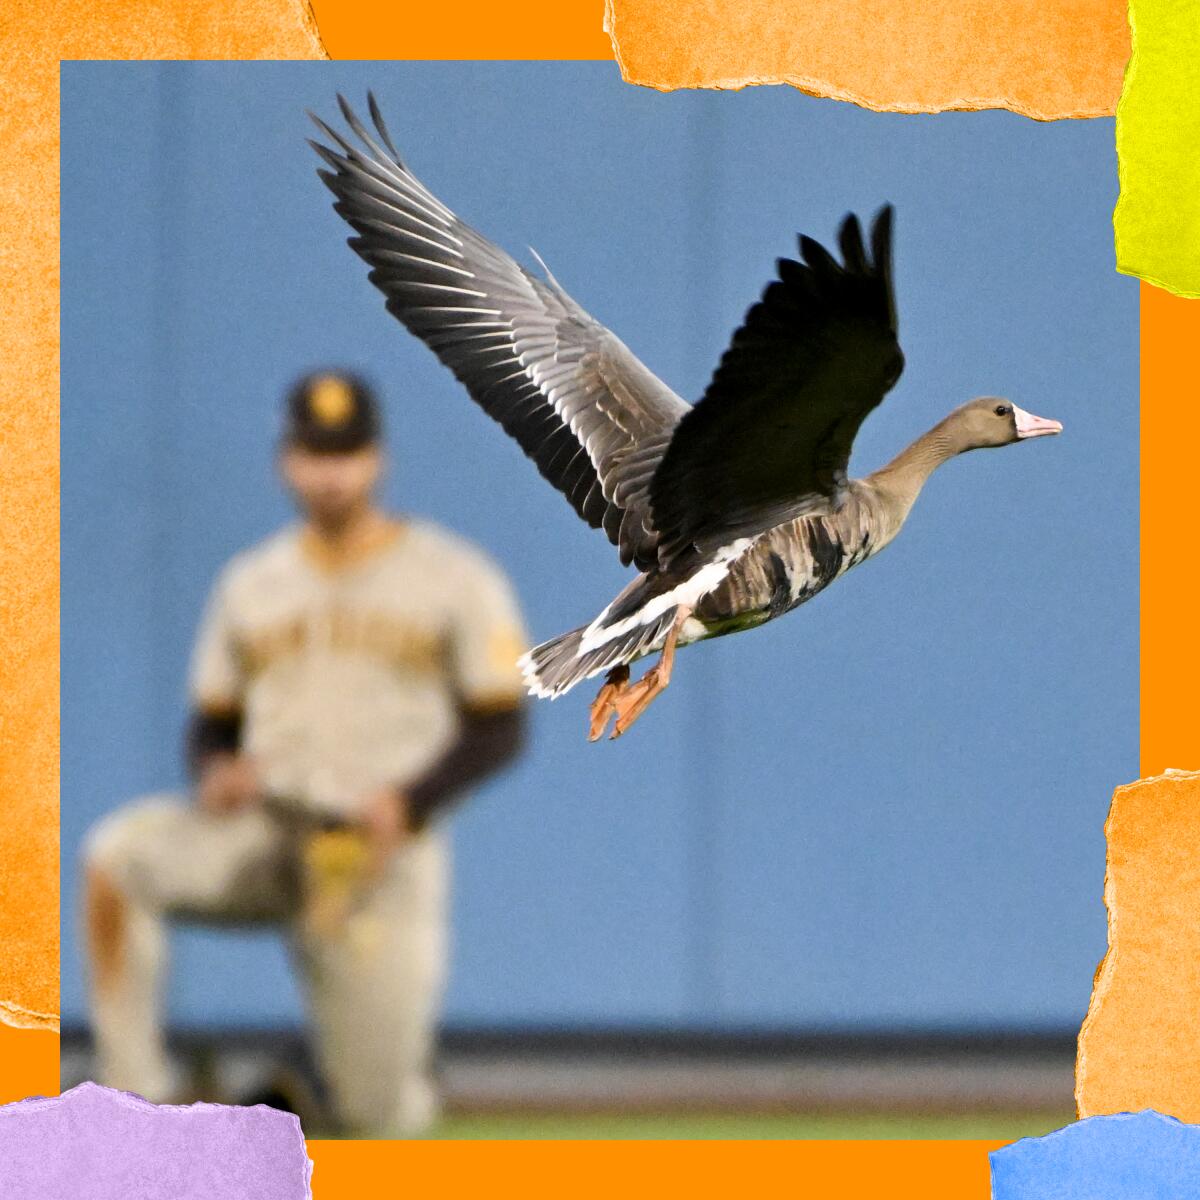 Close-up of a goose with wings spread and a baseball player in the background.